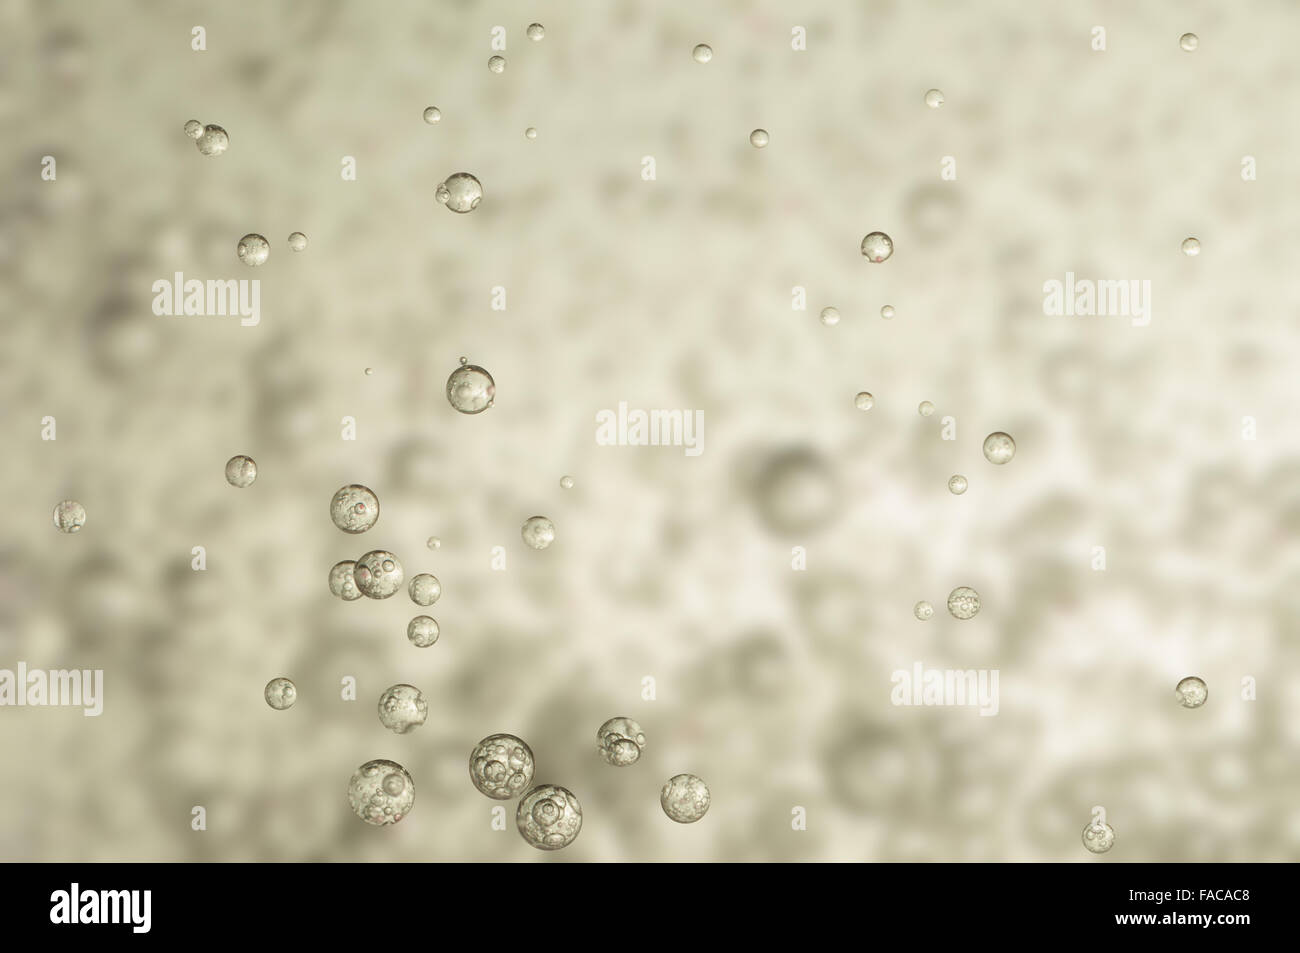 Many small bubbles in a glass of water Stock Photo